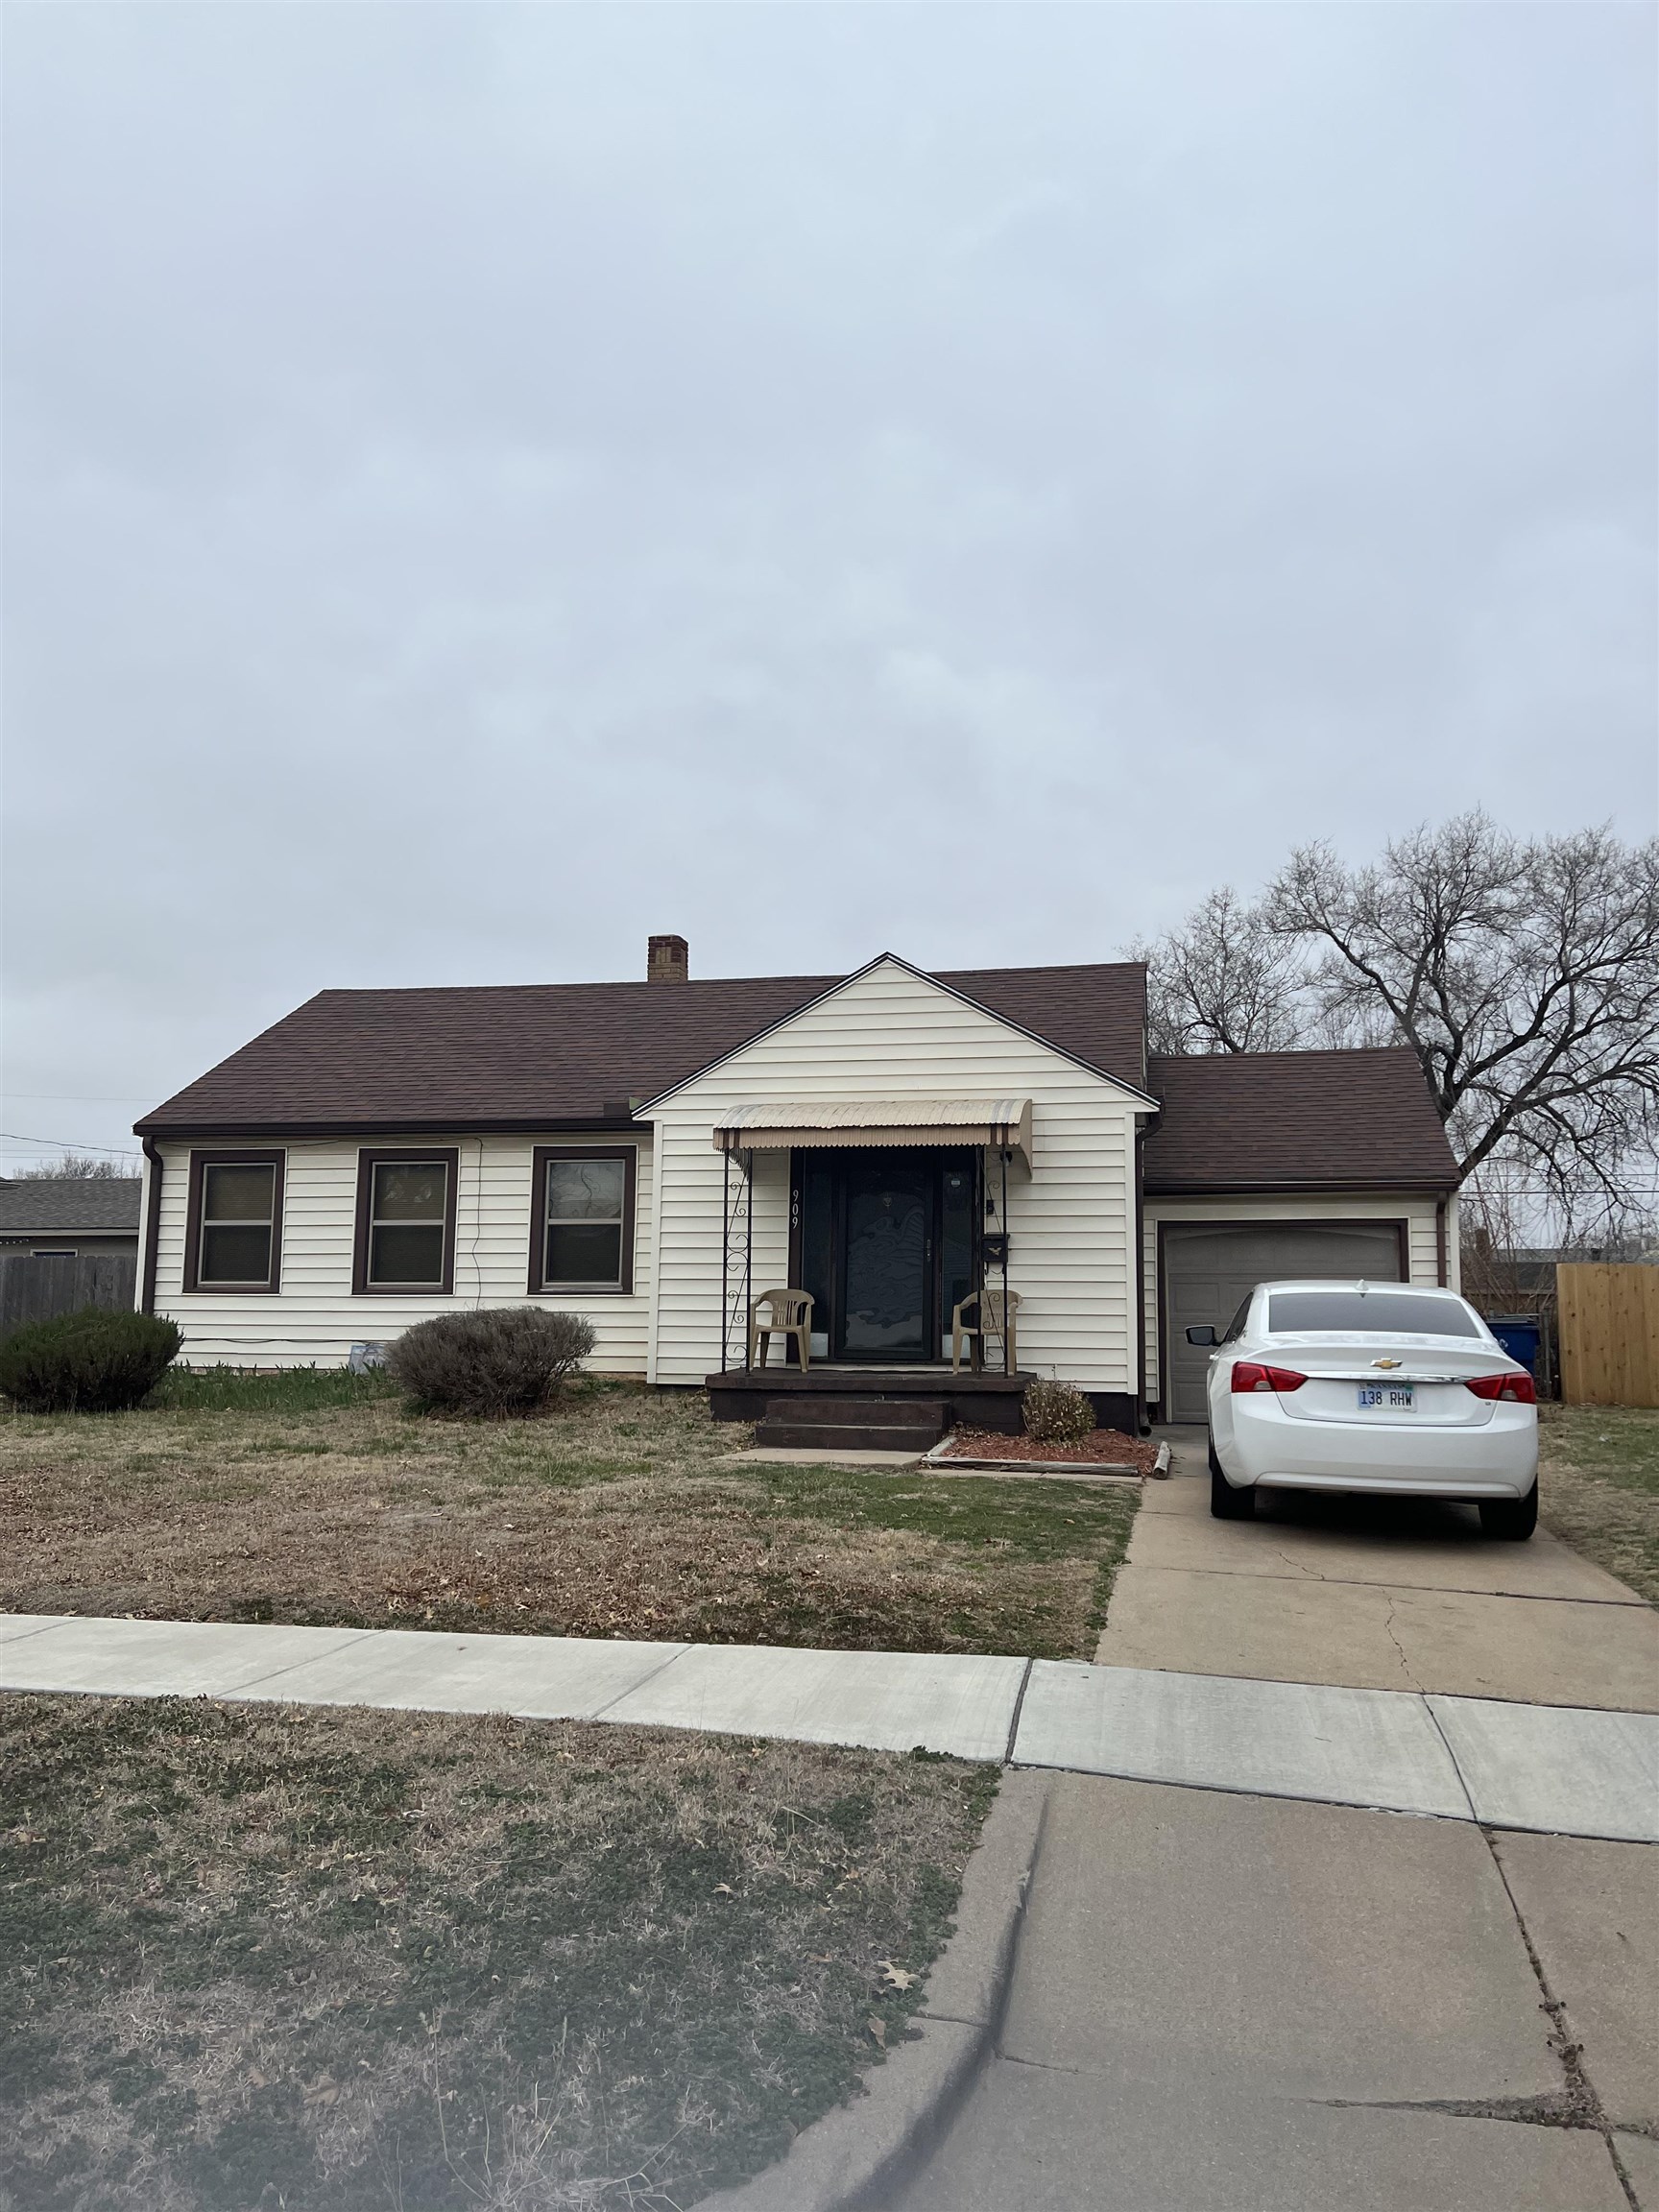 3 bedroom ranch home with main floor living room & family room, basement, and garage. Currently rent